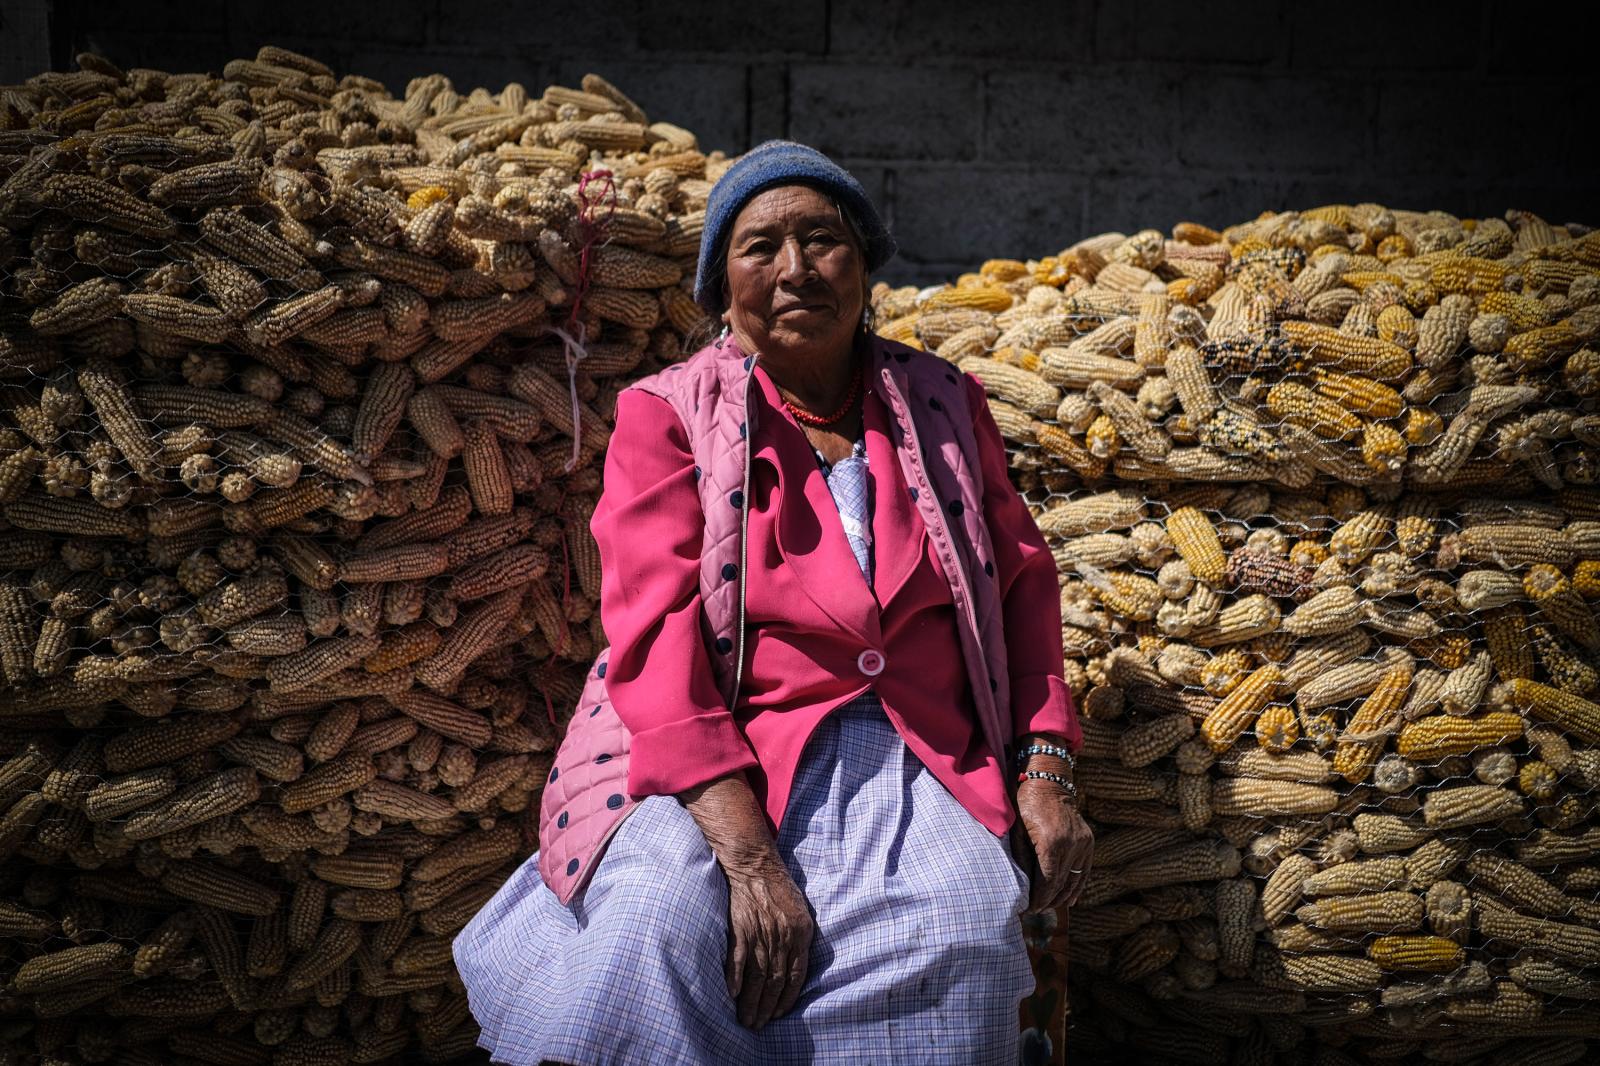 Women of maize, ancestral wisdom against an industry that sickens